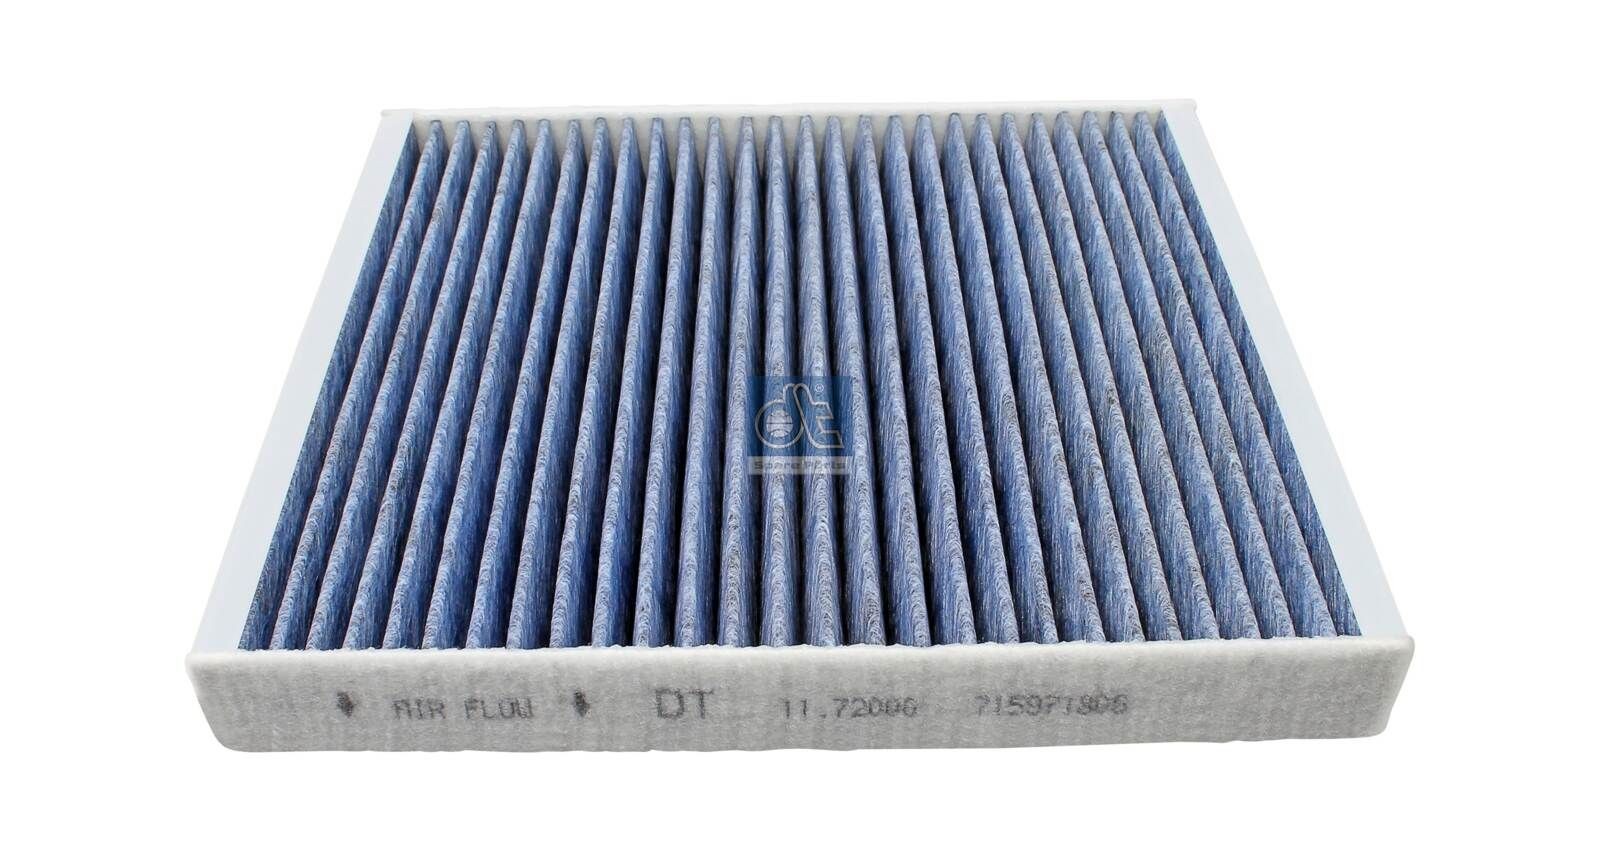 11.72000 DT Spare Parts Pollen filter RENAULT bio-functional cabin air filter, 254 mm x 235 mm x 32 mm